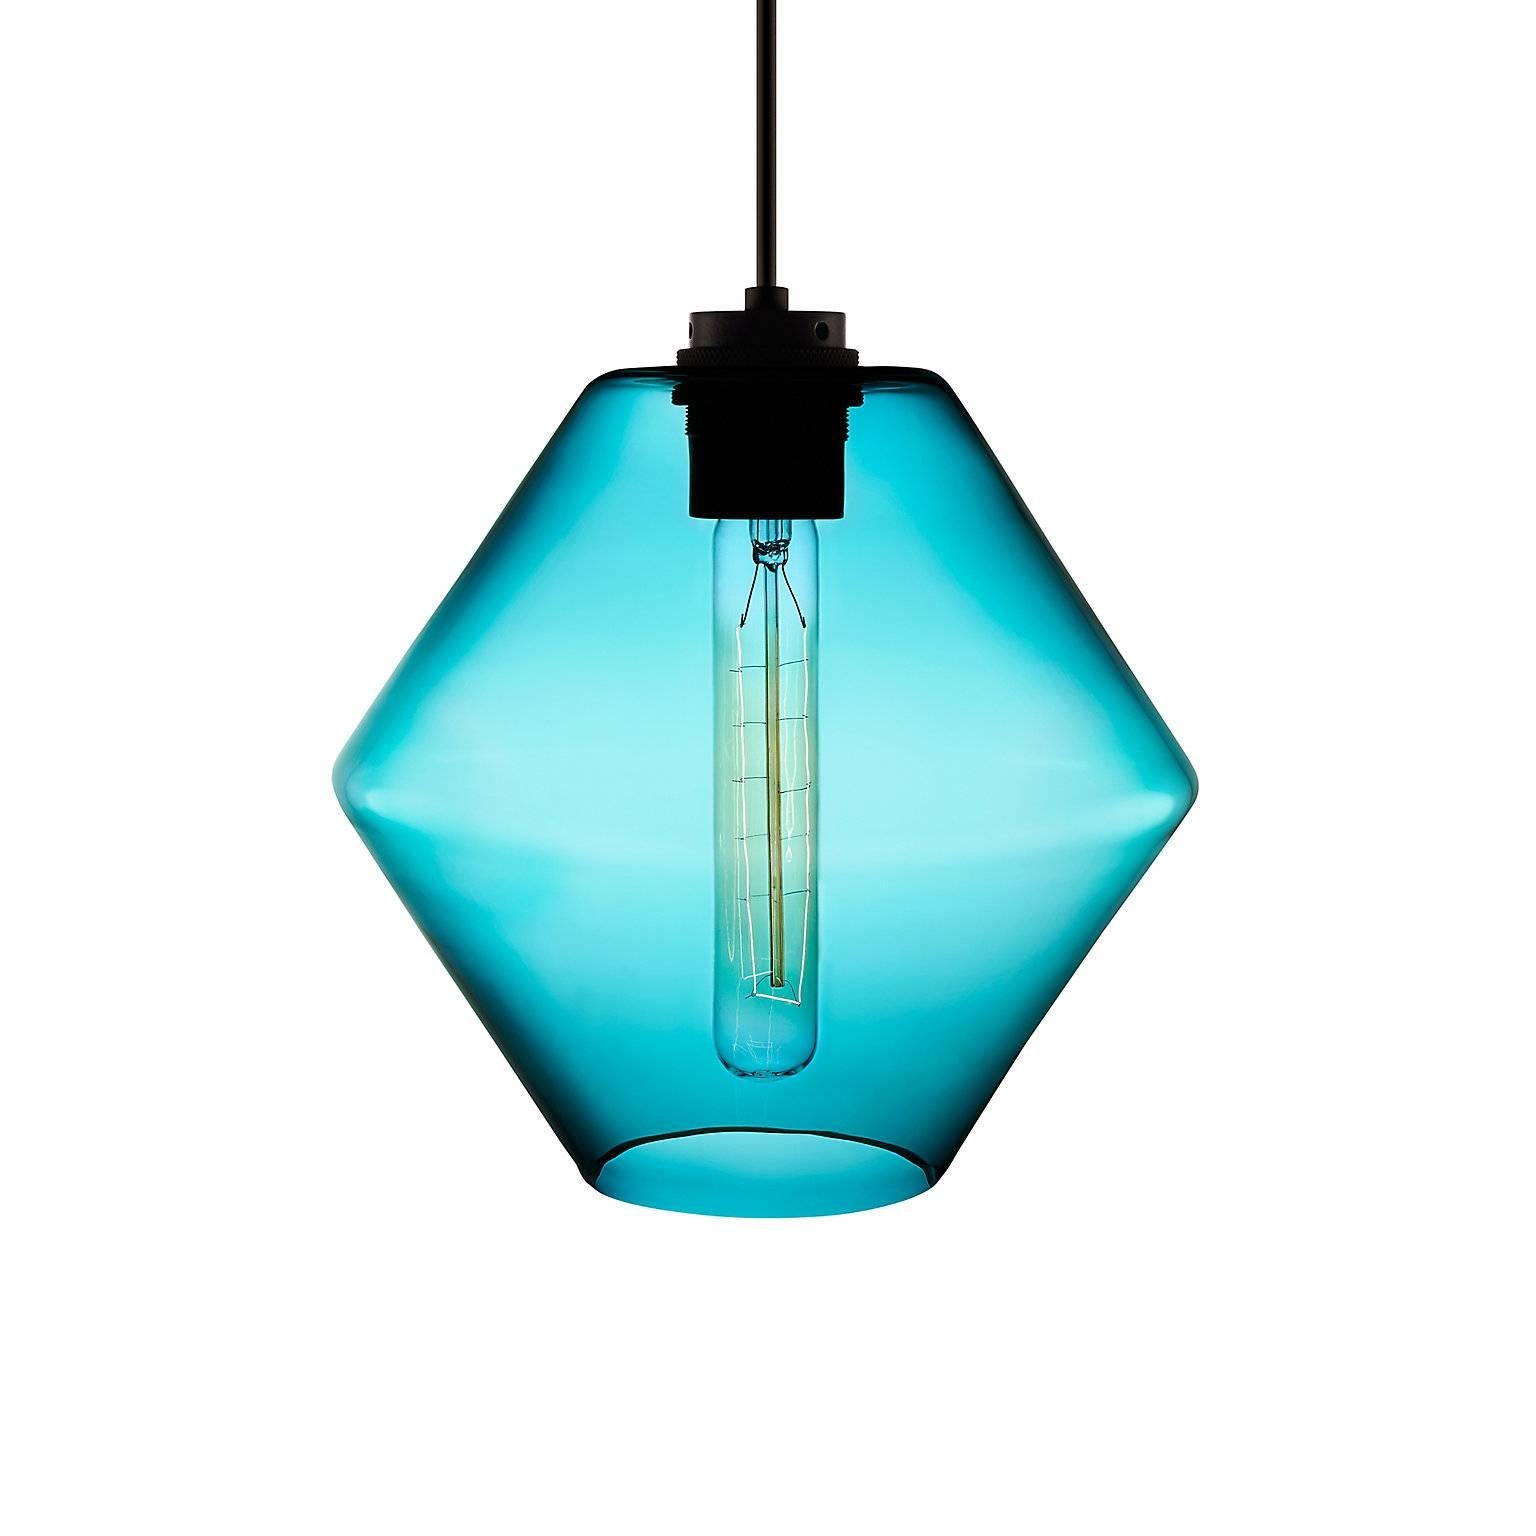 Trove Opaline Handblown Modern Glass Pendant Light, Made in the USA In New Condition For Sale In Beacon, NY